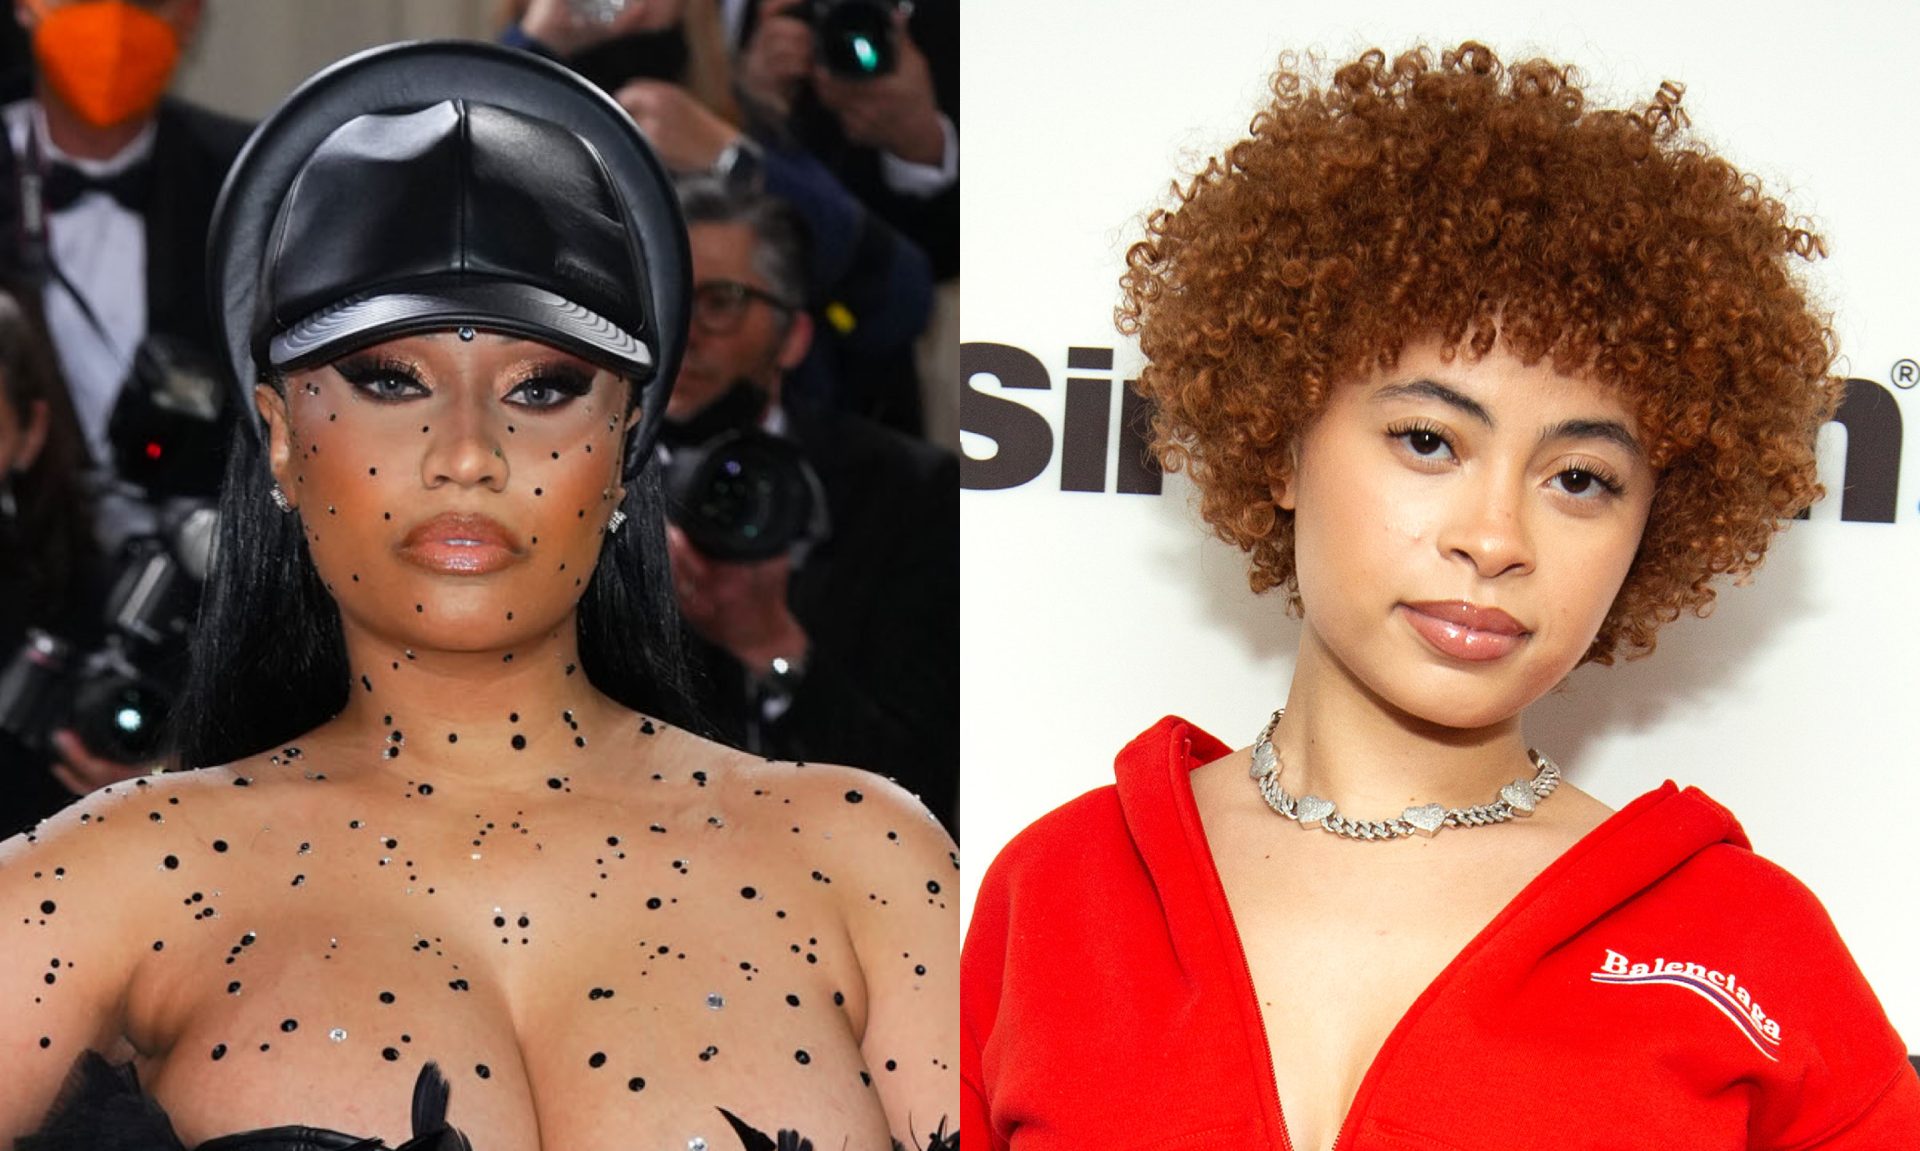 From Ice Spice Ft. Nicki Minaj To SZA Ft. Doja Cat: Here Are 5 New Collabs To Get Your Playlist Poppin'